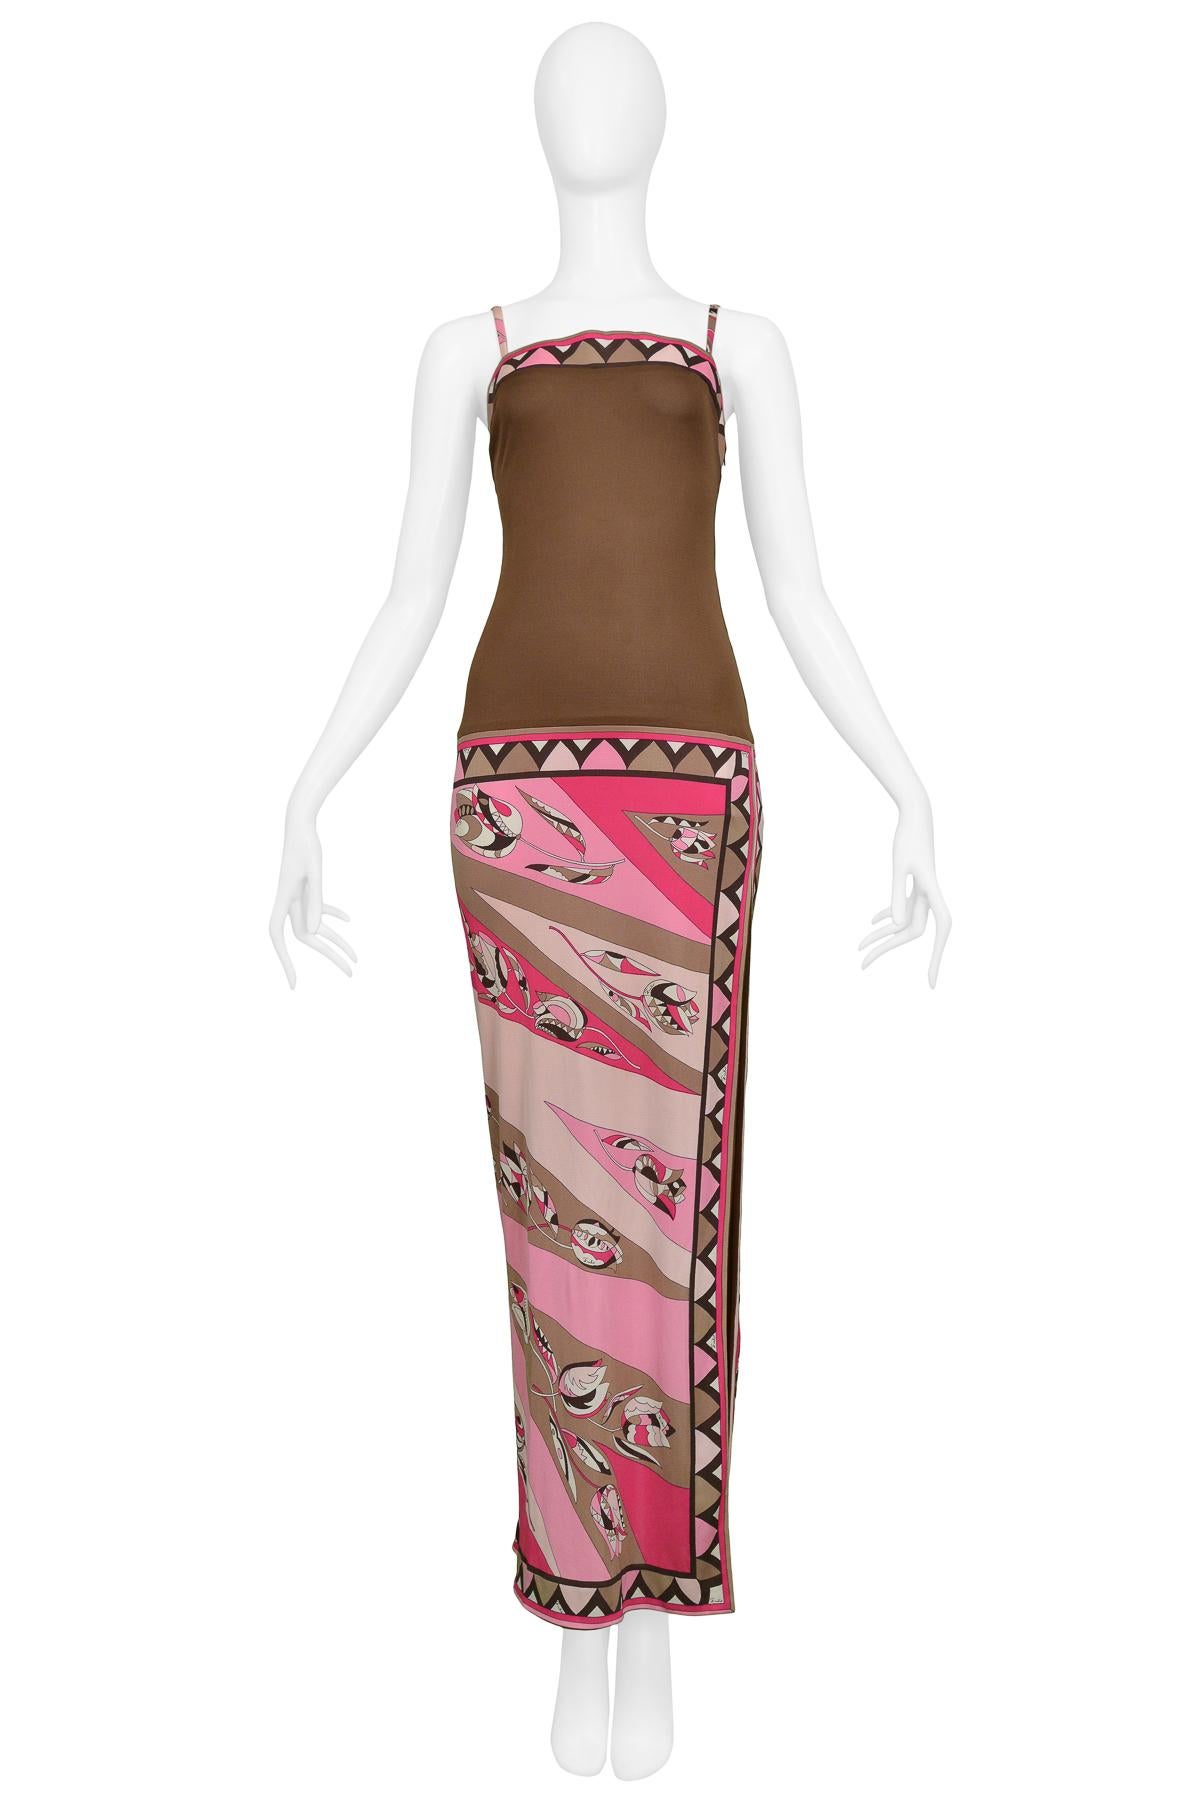 Resurrection Vintage is excited to offer a vintage Emilio Pucci pink and brown silk jersey evening gown featuring an abstract print with 